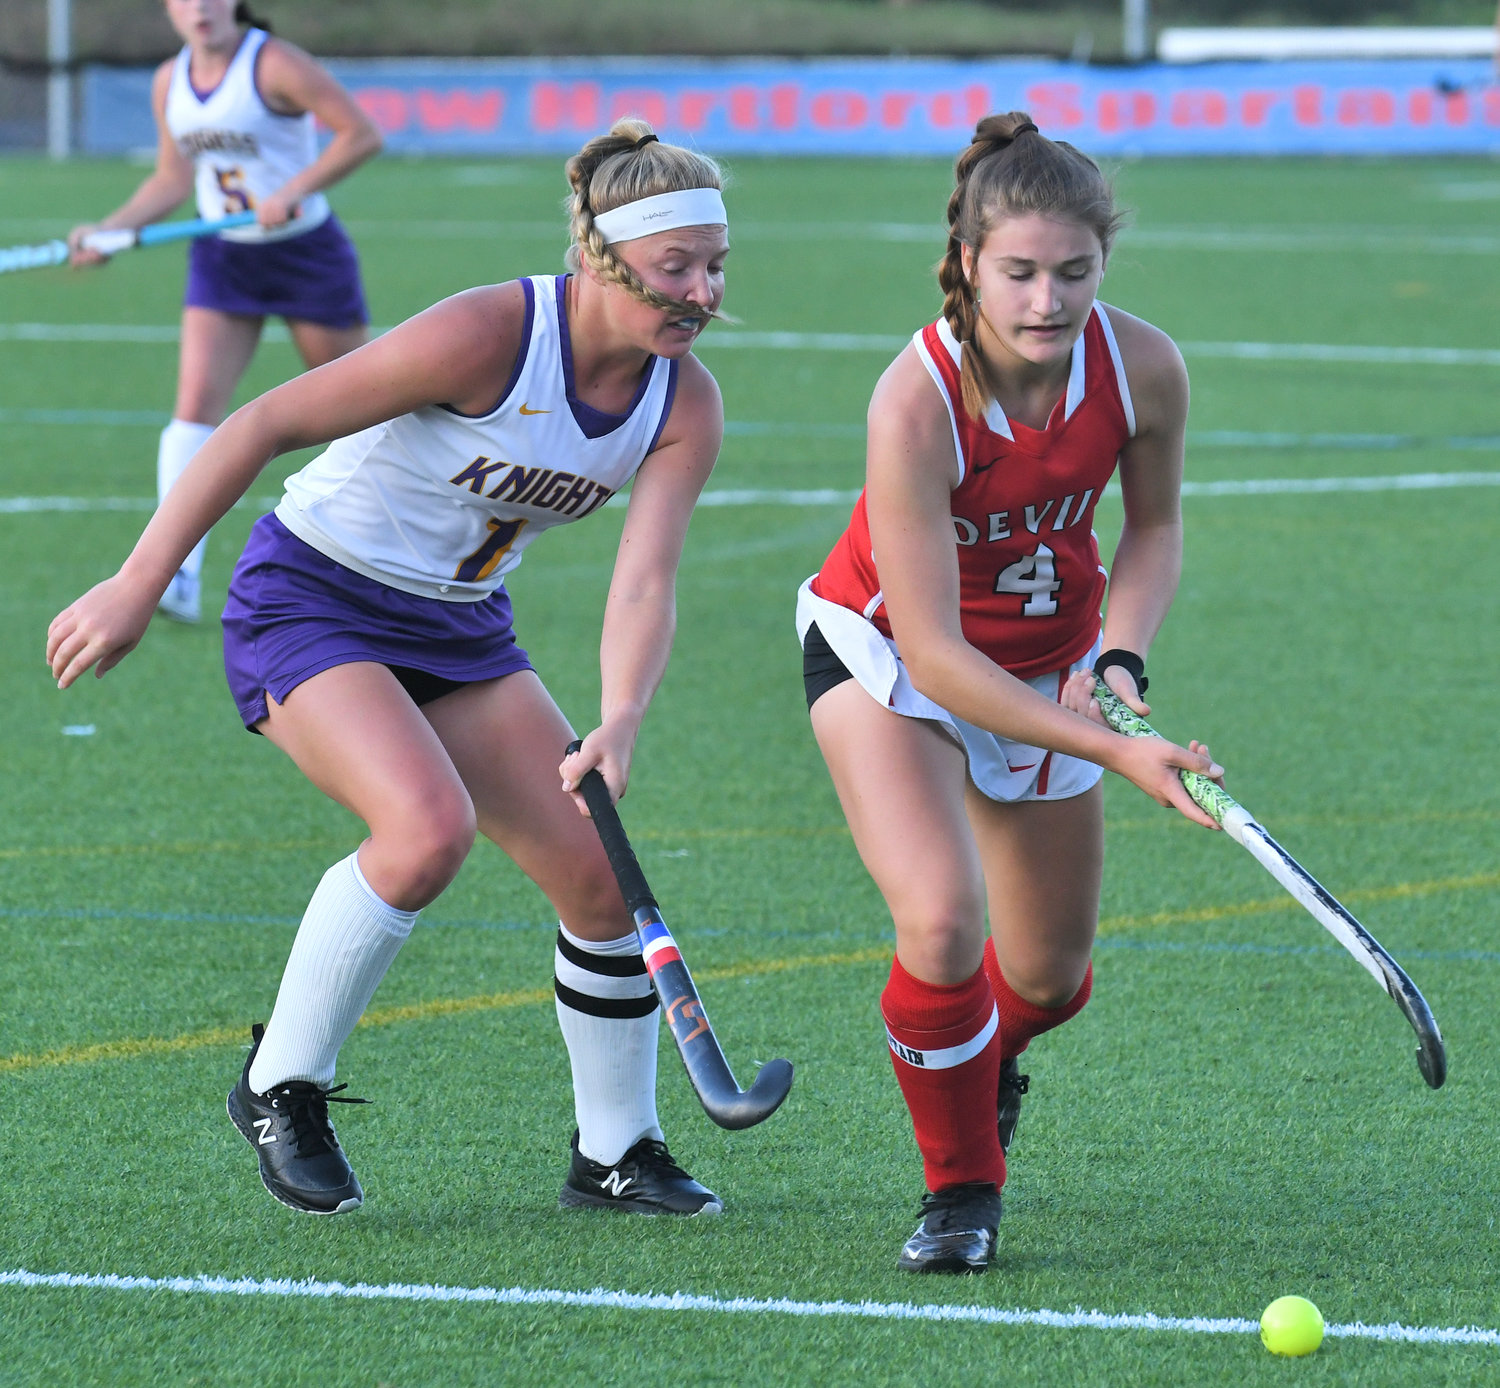 Holland Patent's Margaret Cummings and and Vernon-Verona-Sherrill's Grace Croft look to control the ball Monday at Accelerate Sports Complex. Cummings scored a goal and had an assist in the Golden Knights' 6-0 win.